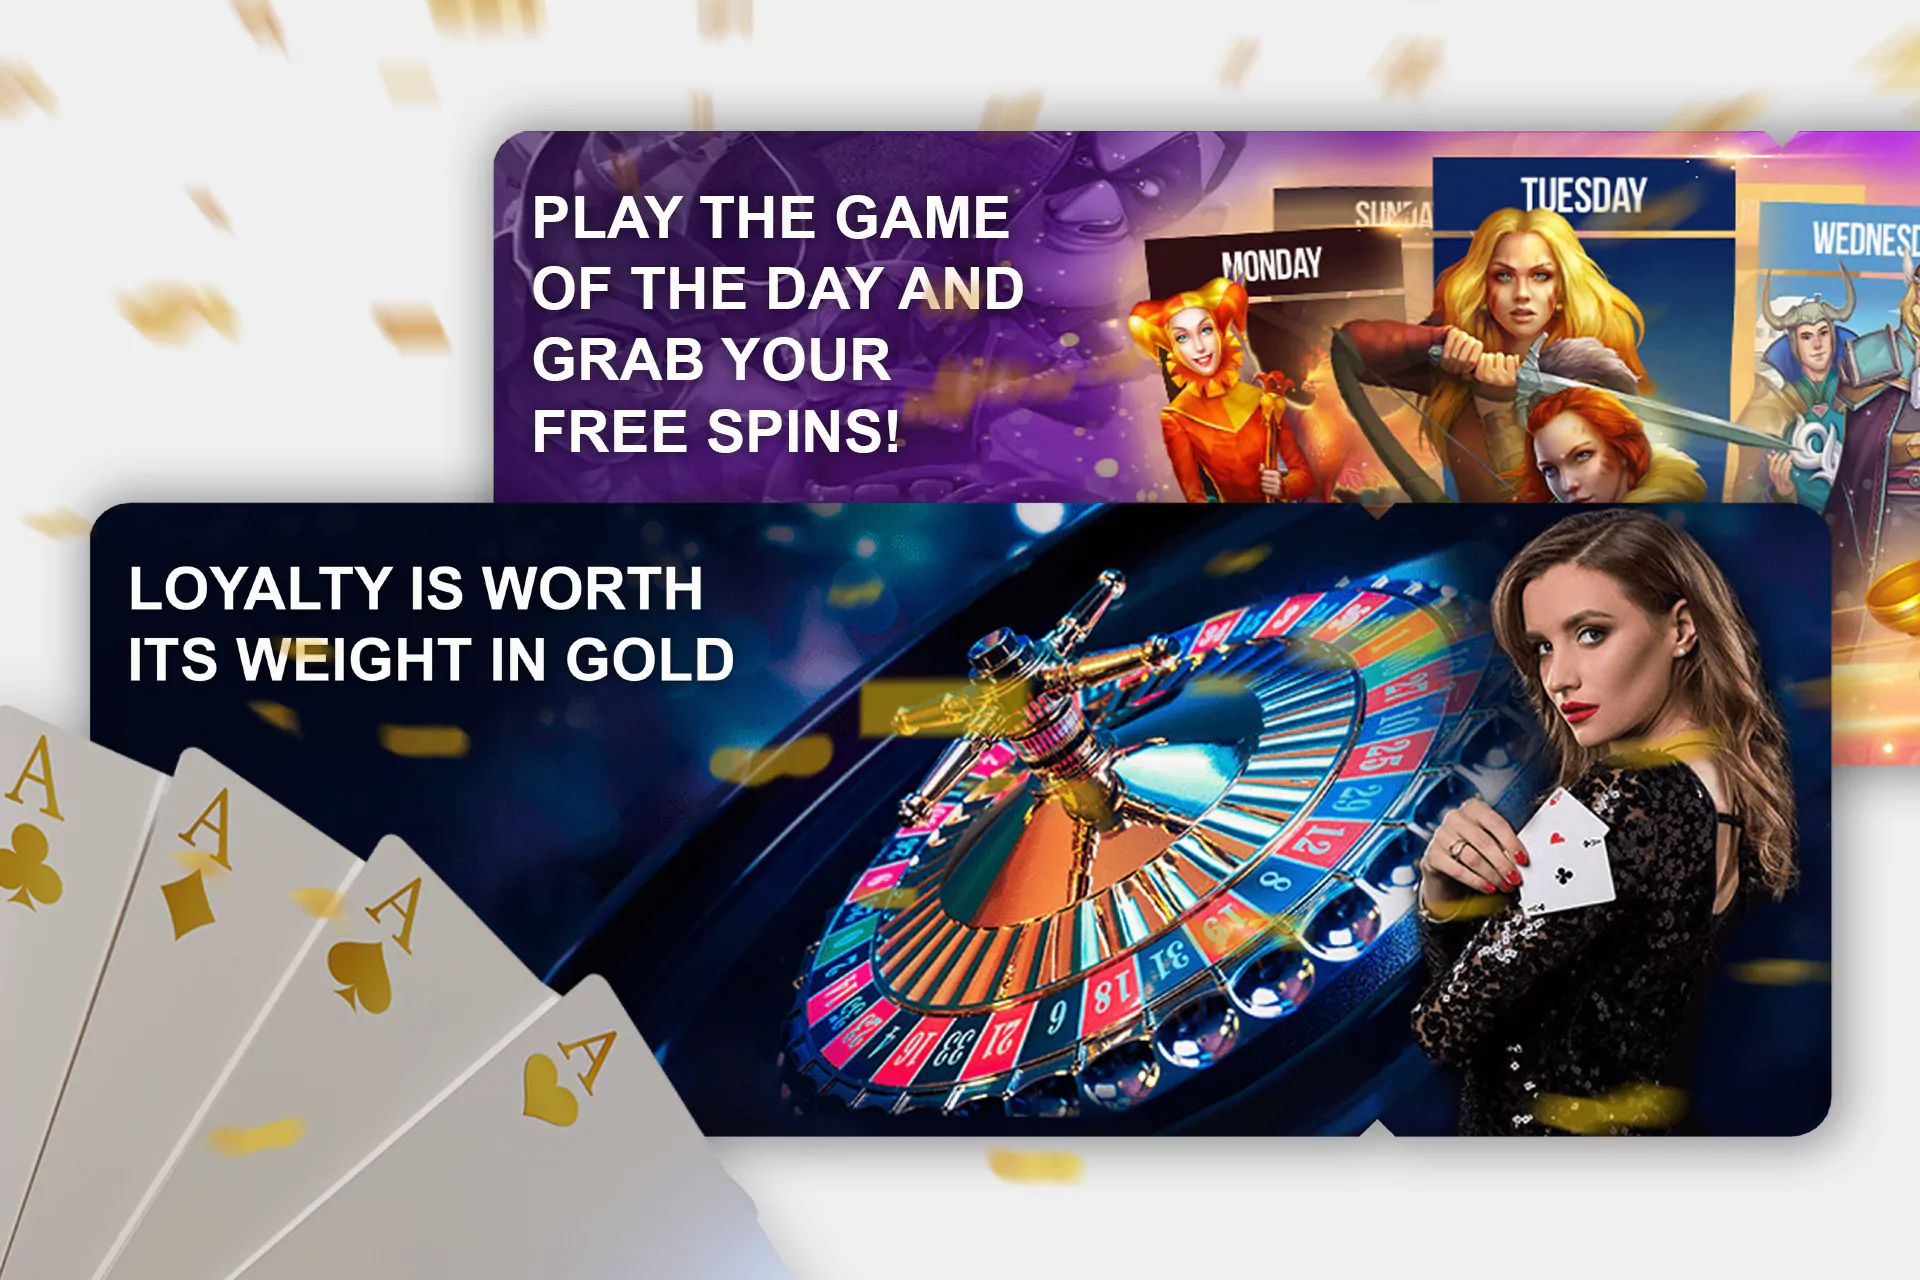 There are a few bonus programs you can use for playing at the 1xBet Online Casino.